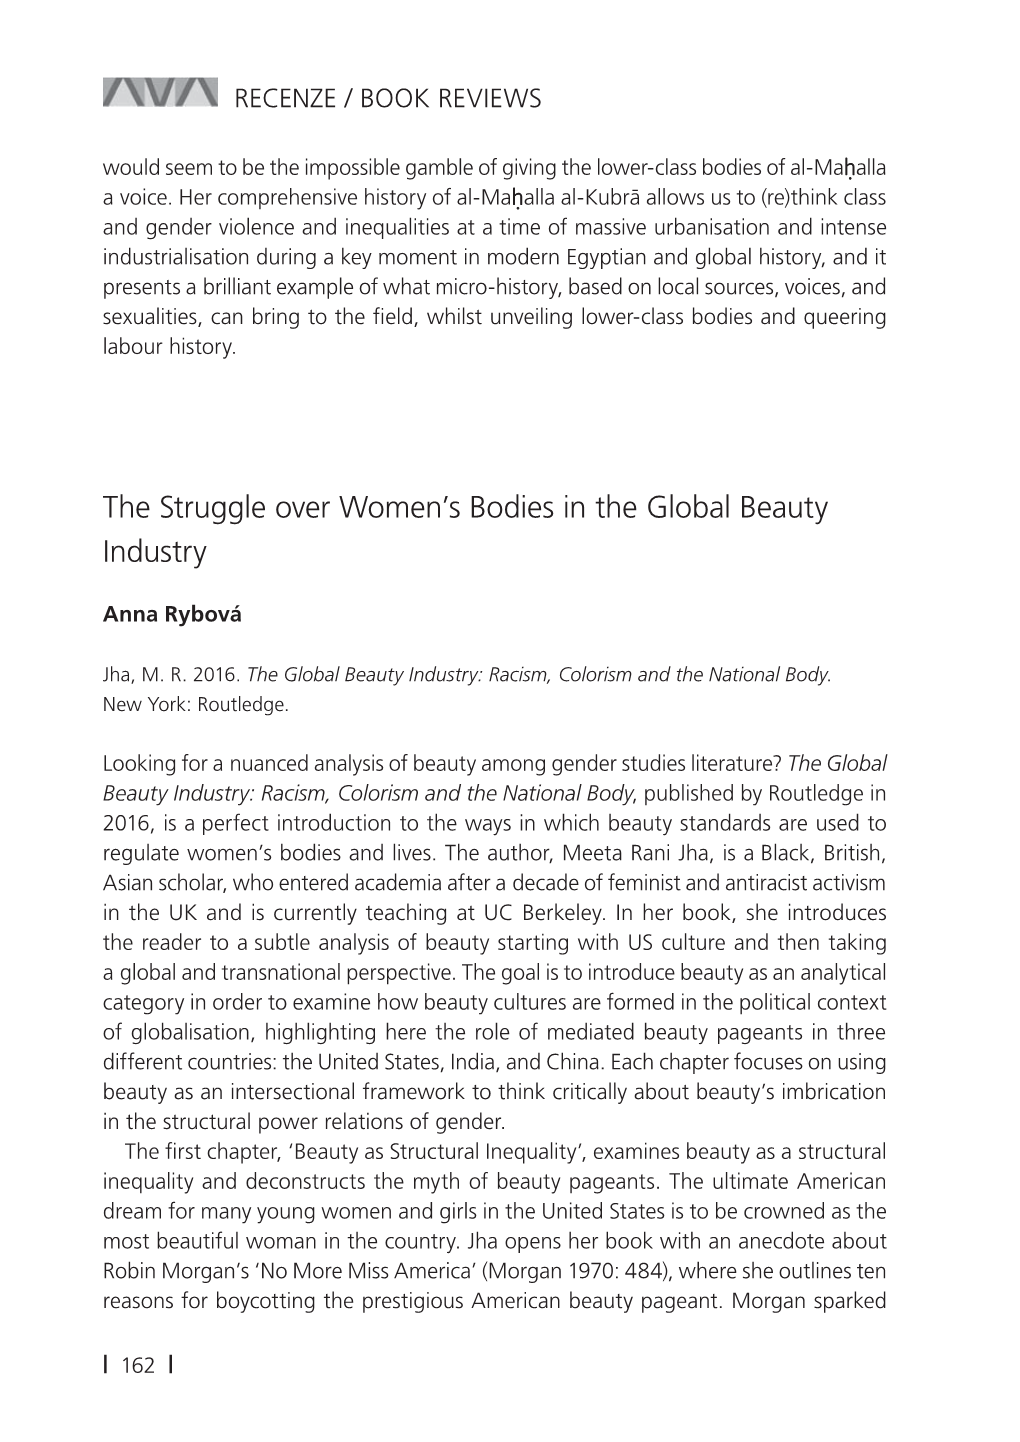 The Struggle Over Women's Bodies in the Global Beauty Industry